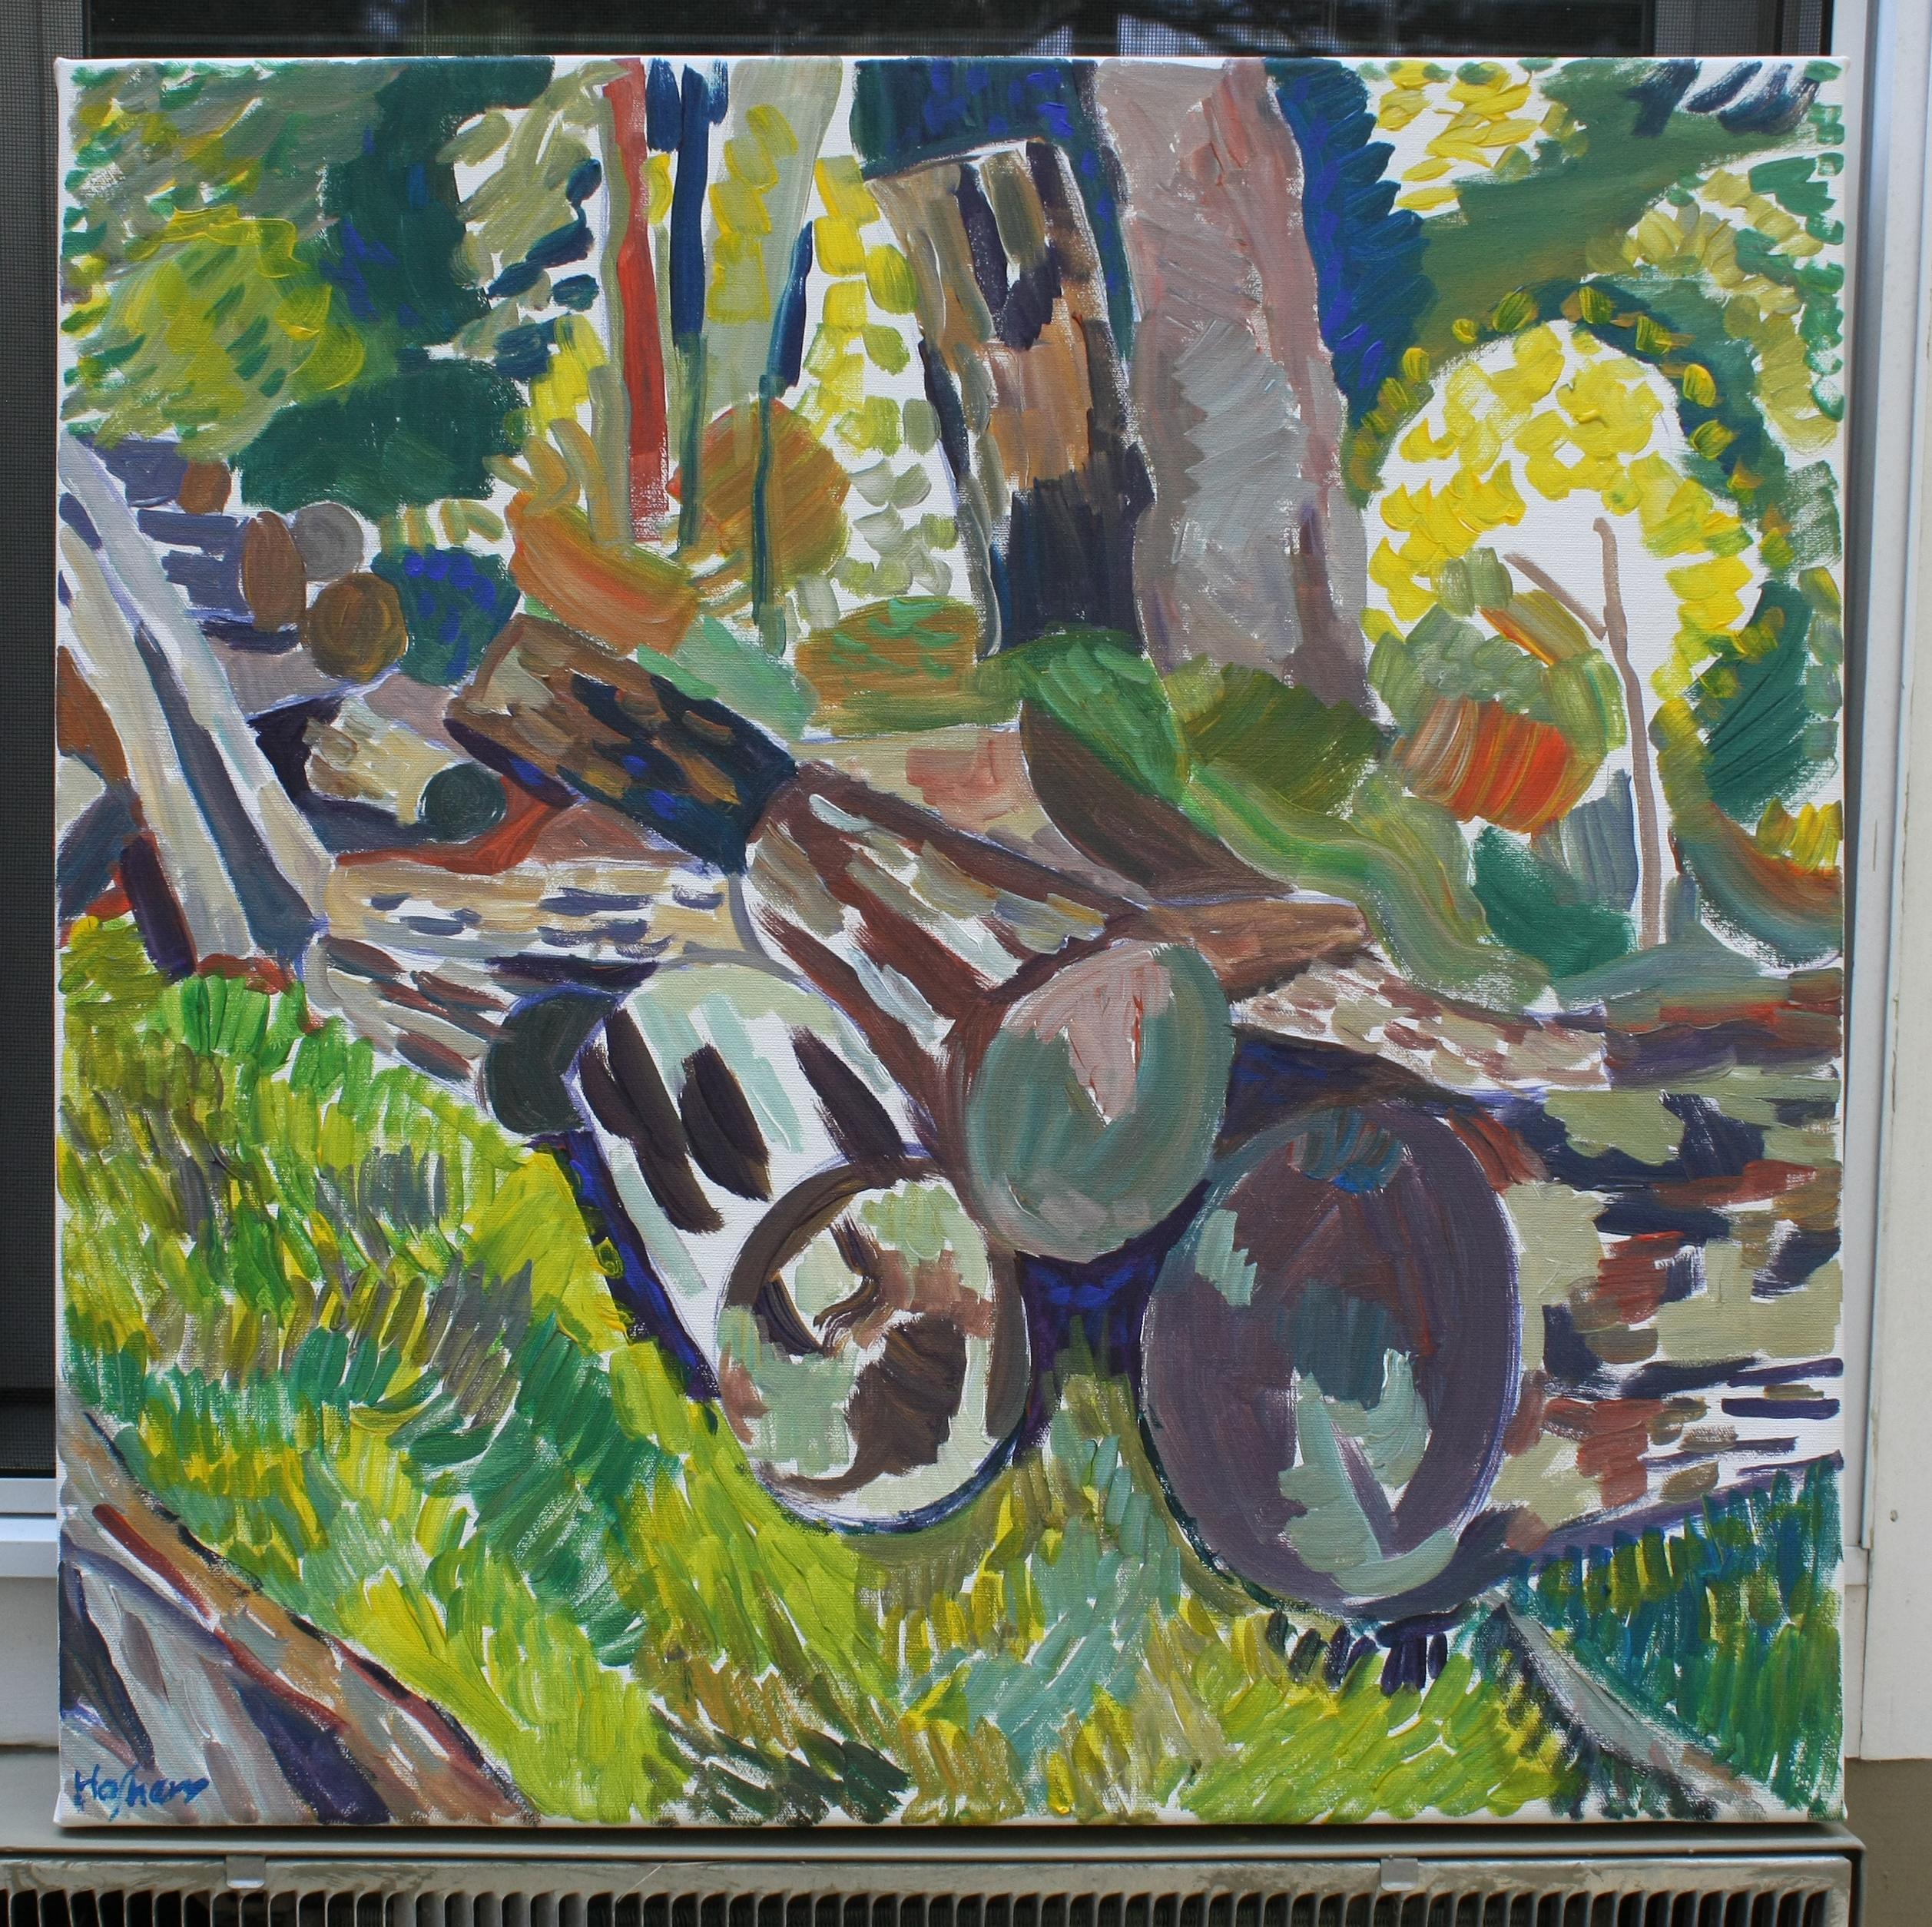 <p>Artist Comments<br>Artist Robert Hofherr presents a colorful expressionist rendering of an ordinary woodpile. The piece gets subjected to the complete Fauvist treatment. Bold colors, simplified drawing style, and highly energetic paint